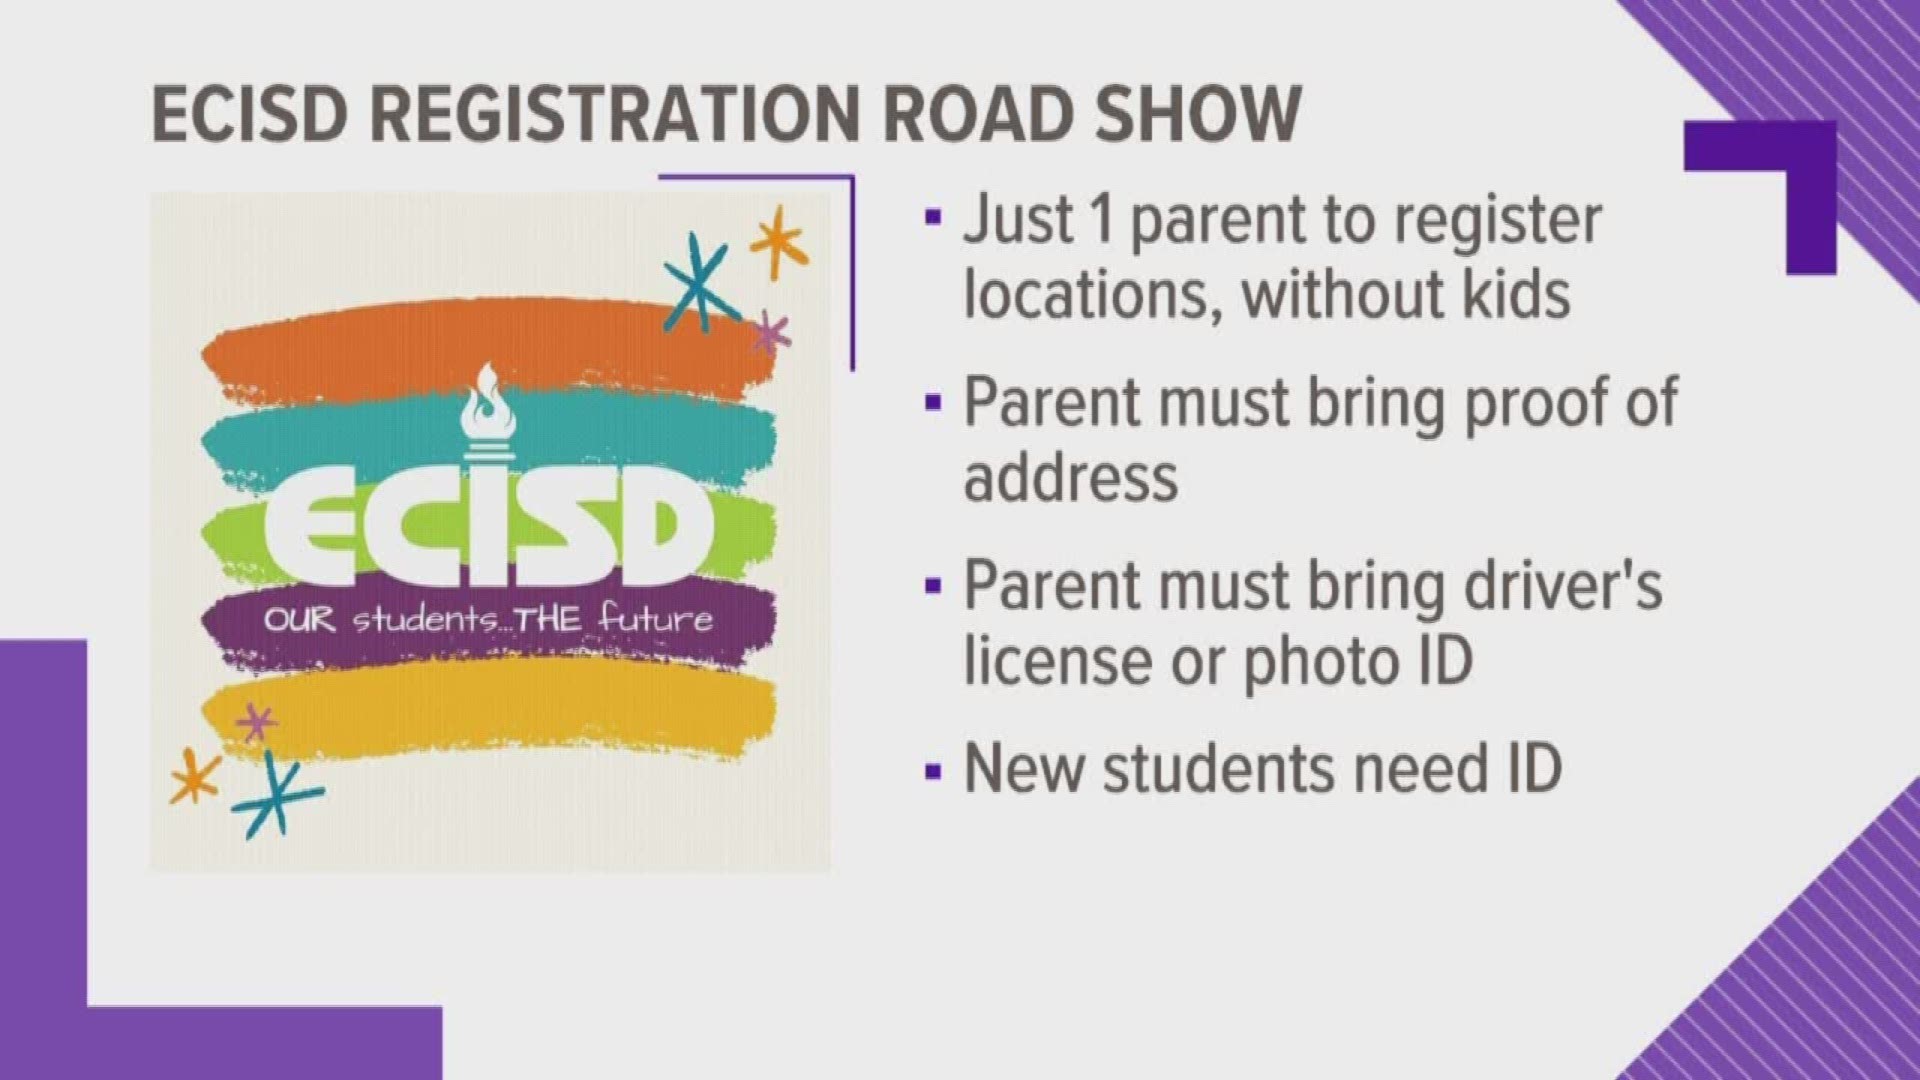 ECISD will be sending school buses into the community to help parents register their children for classes.